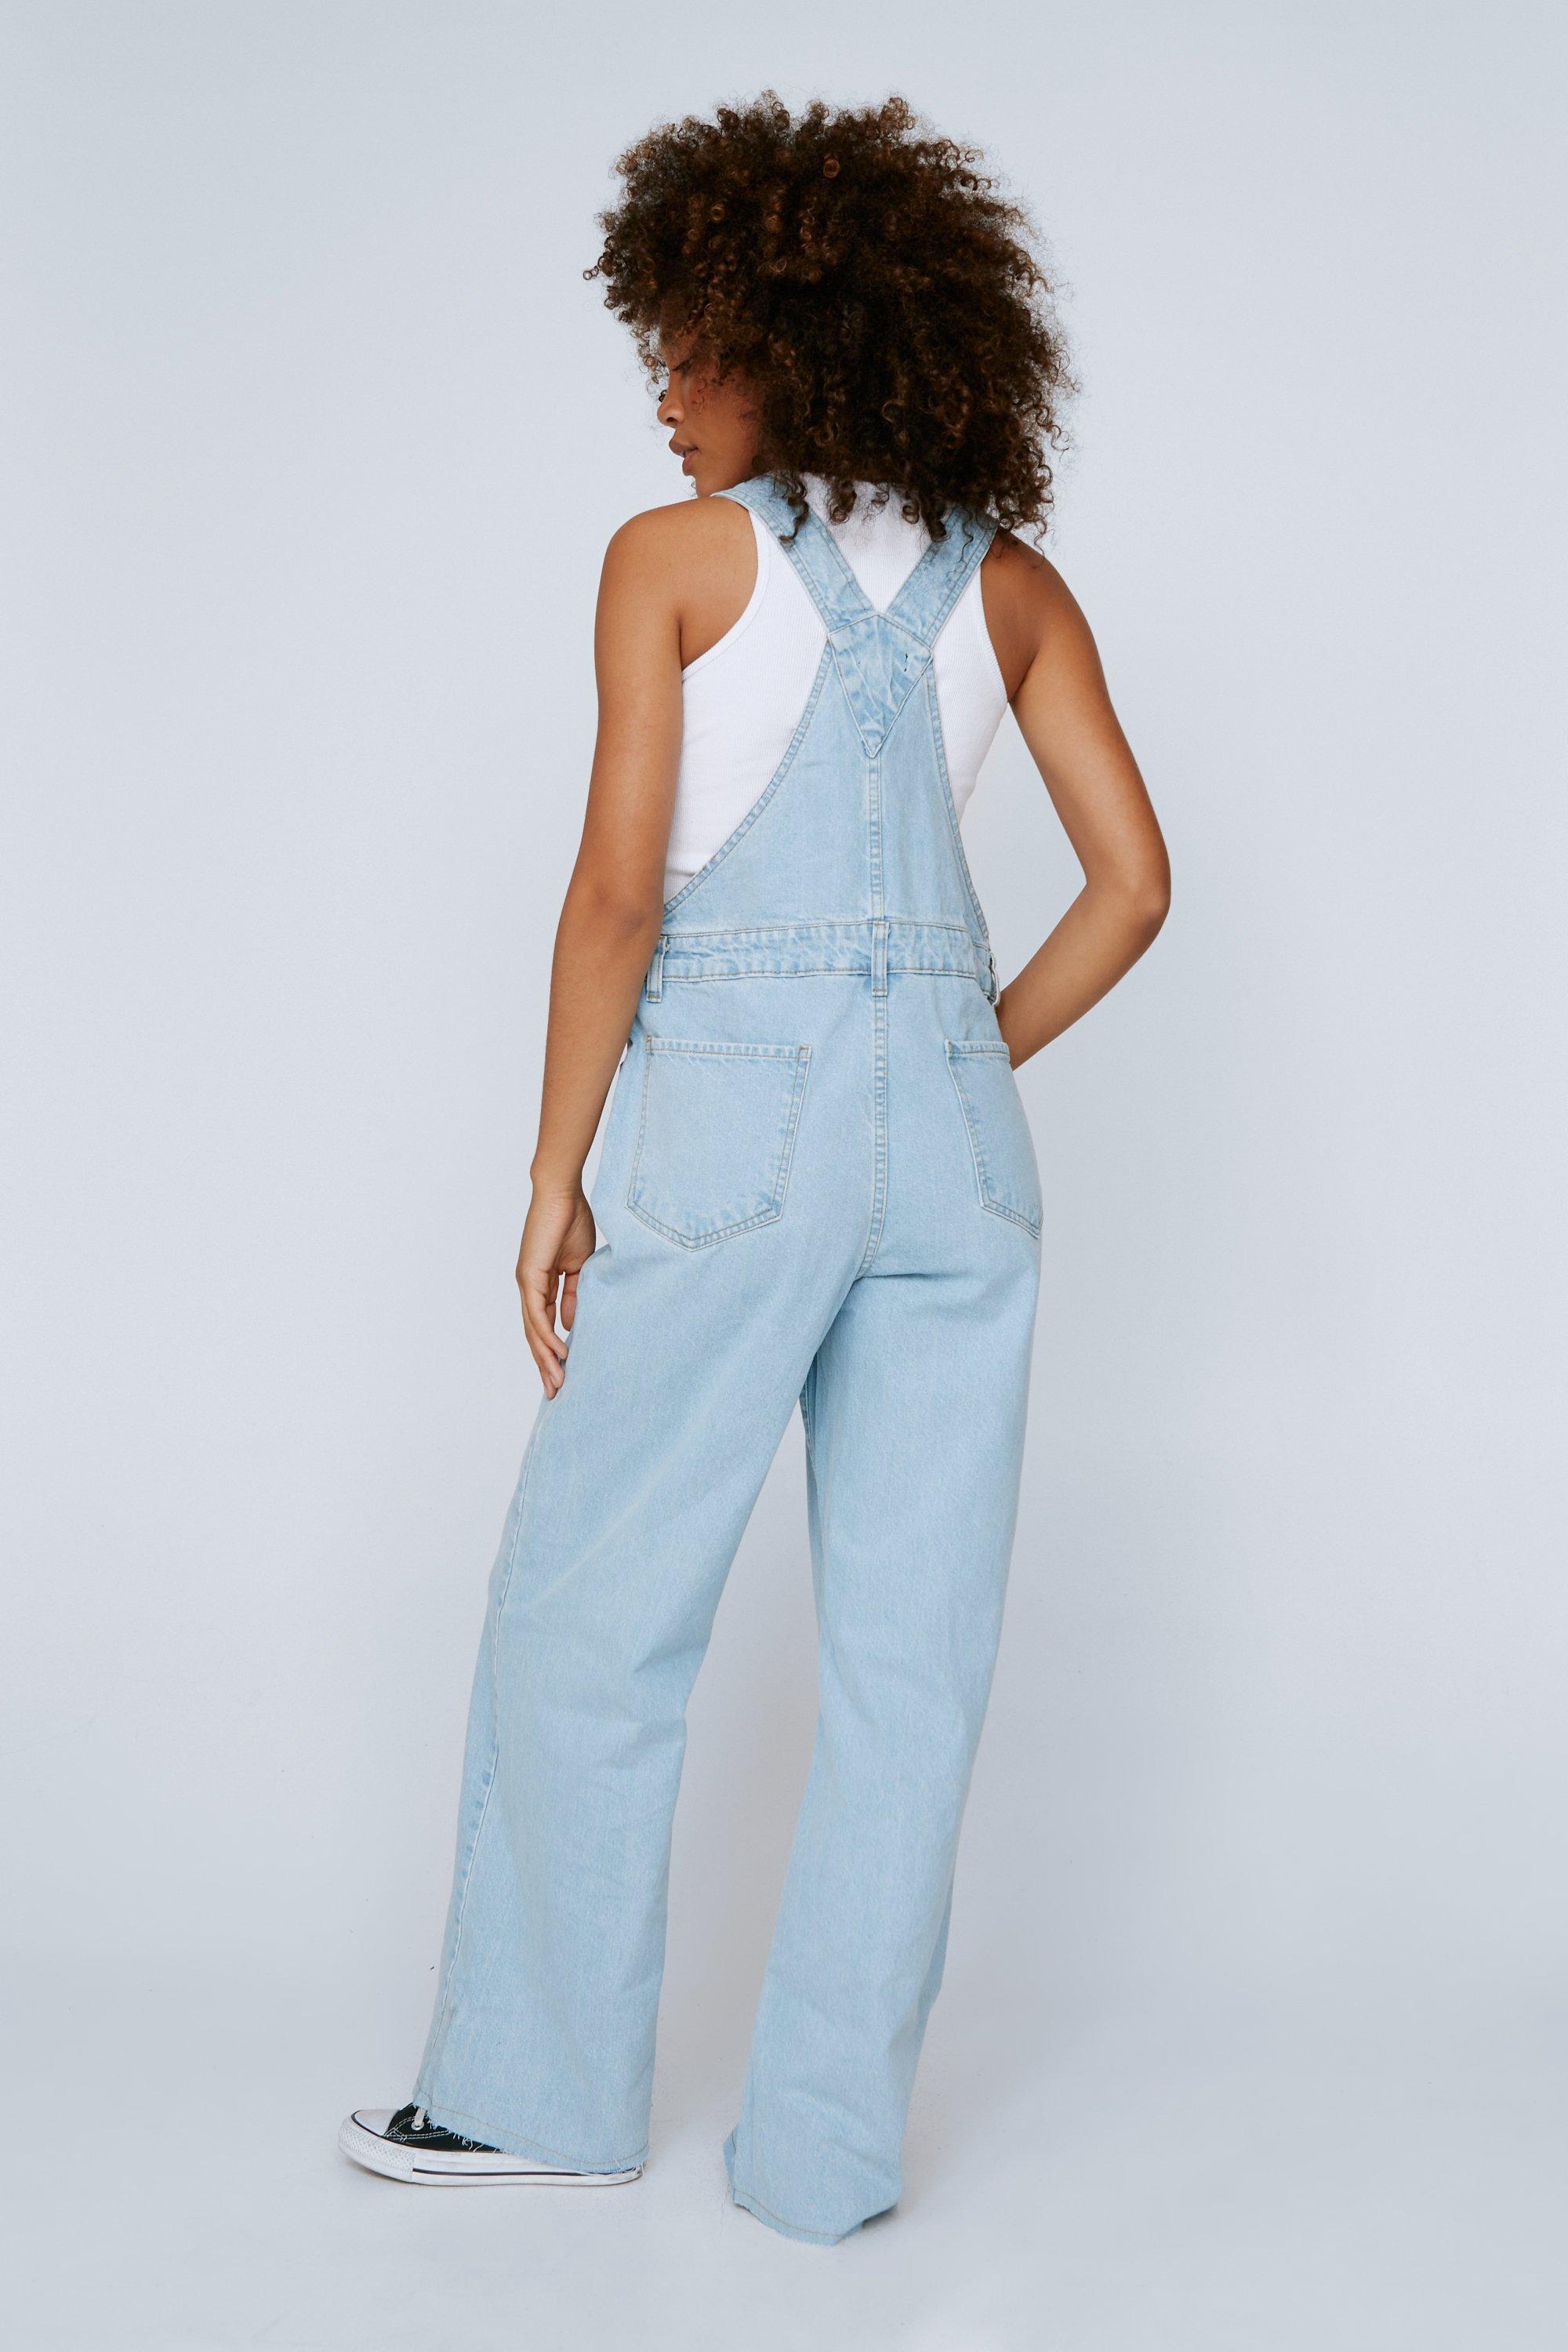 discount 70% Blue 38                  EU WOMEN FASHION Baby Jumpsuits & Dungarees Dungaree Straps Primark dungaree 